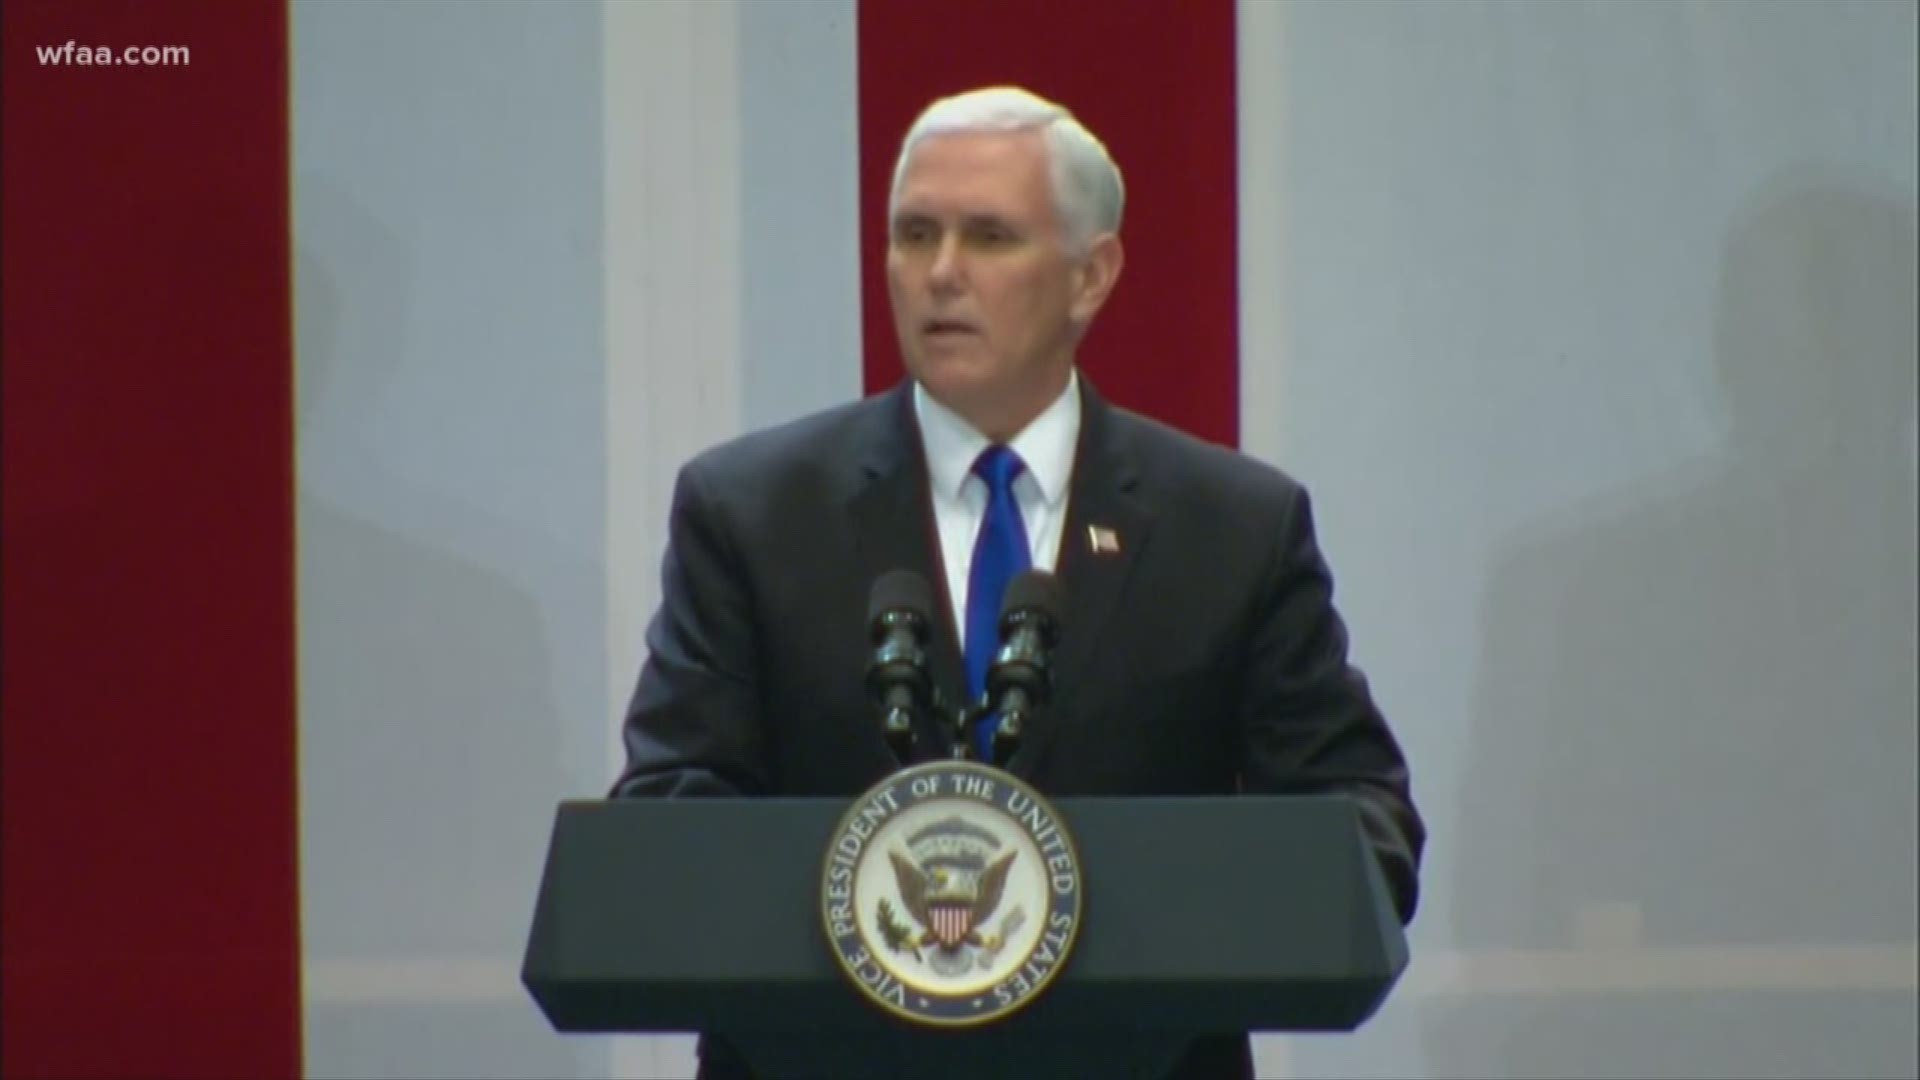 Vice President Pence's second speaking event took place Saturday evening at the 2018 Reagan Day Dinner, hosted by the Dallas County Republican Party, at the Omni Dallas. Pence will be speaking to a sold out crowd of 1,500. Tickets started at $175, though 